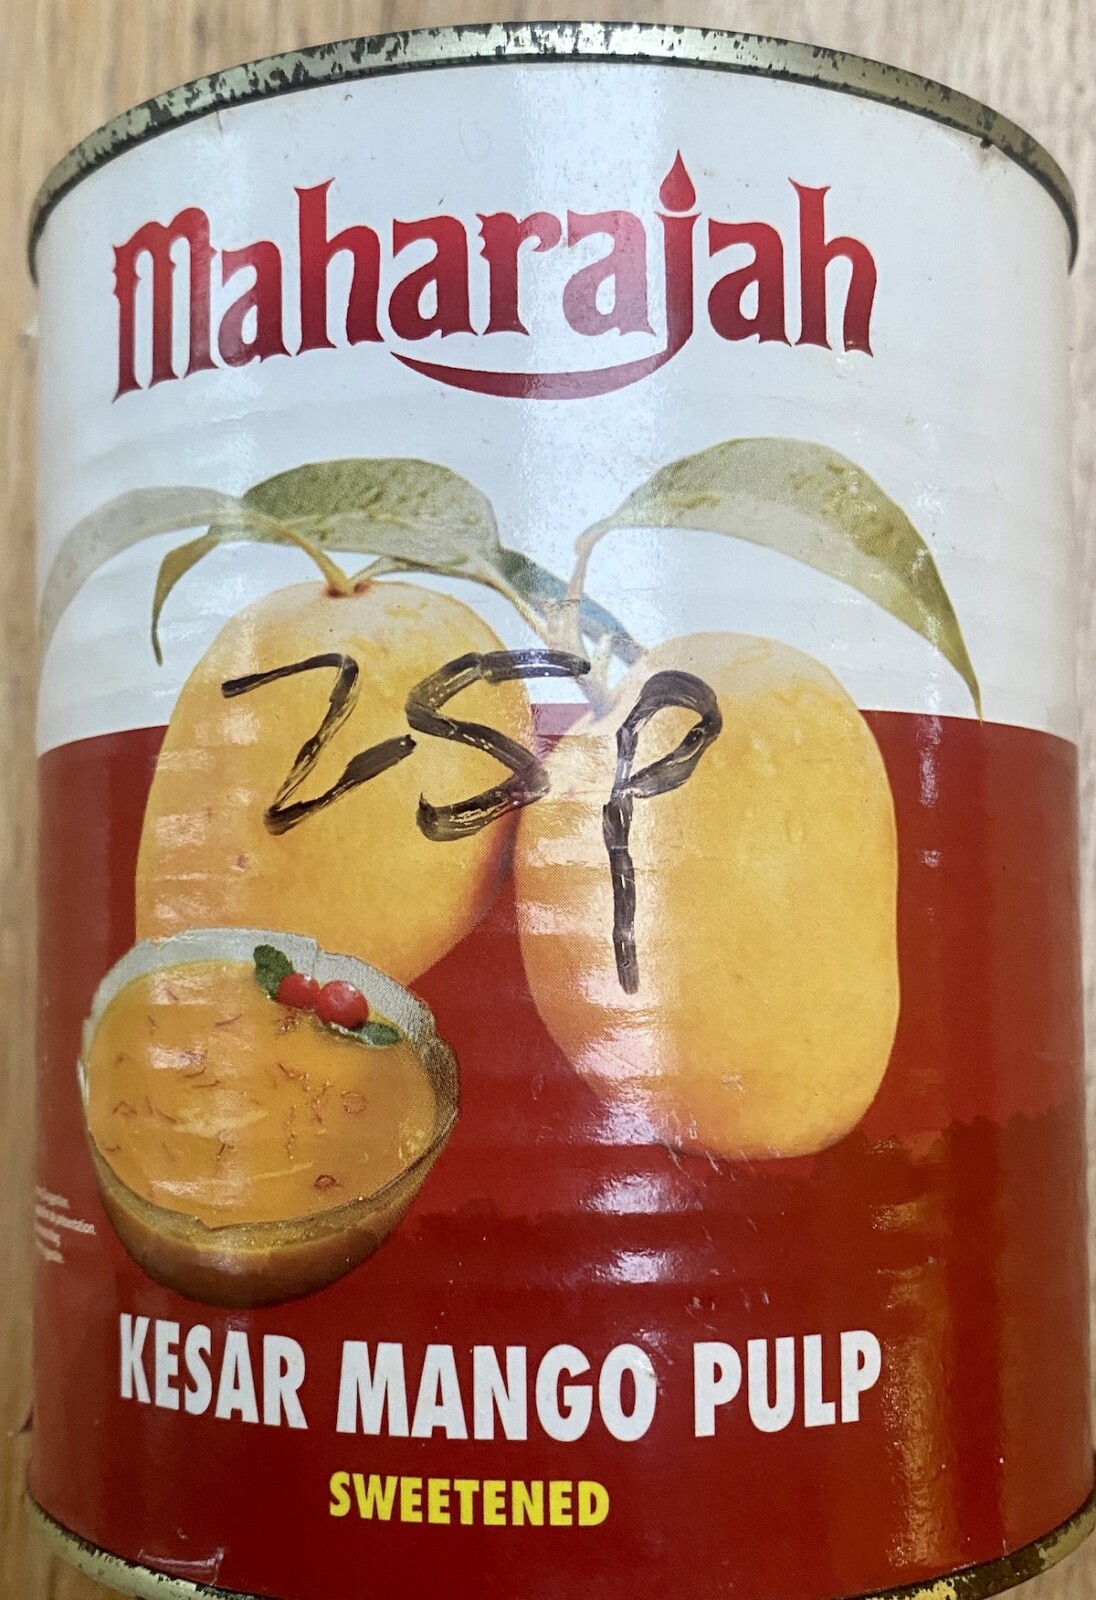 a tin of Kesar brand mango pulp, with 25p written on it by hand.